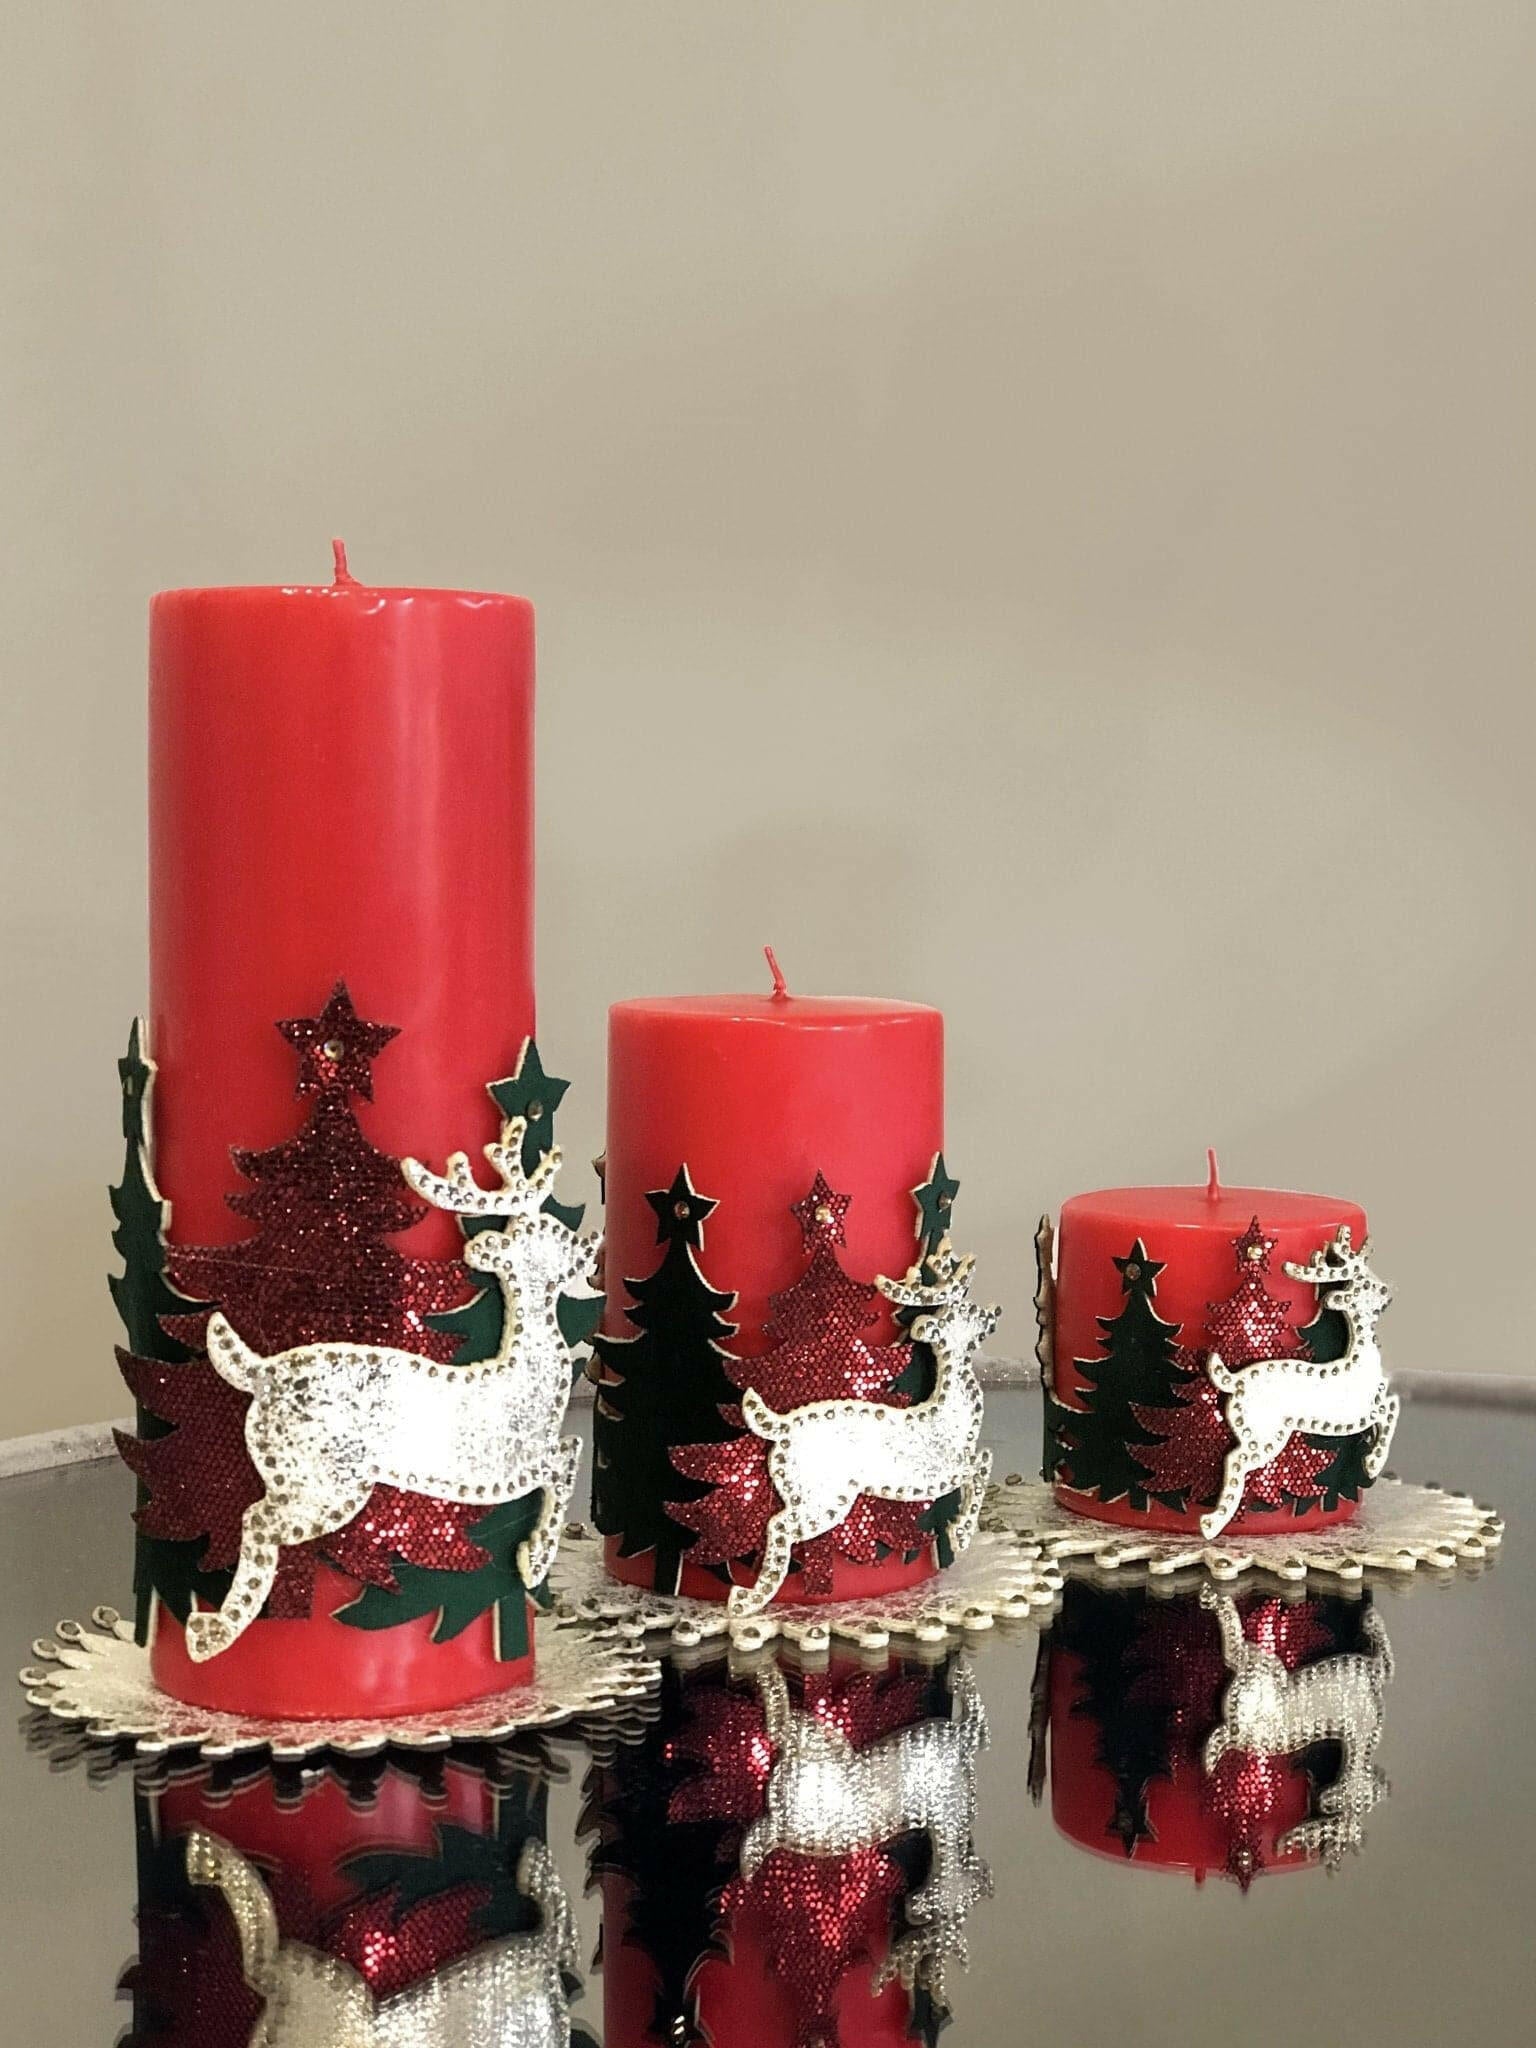 Christmas Deer Red Candle Set of 3, Premium Decorative Colorful Creative Home Candle Sets,CS-CH-CSD-R